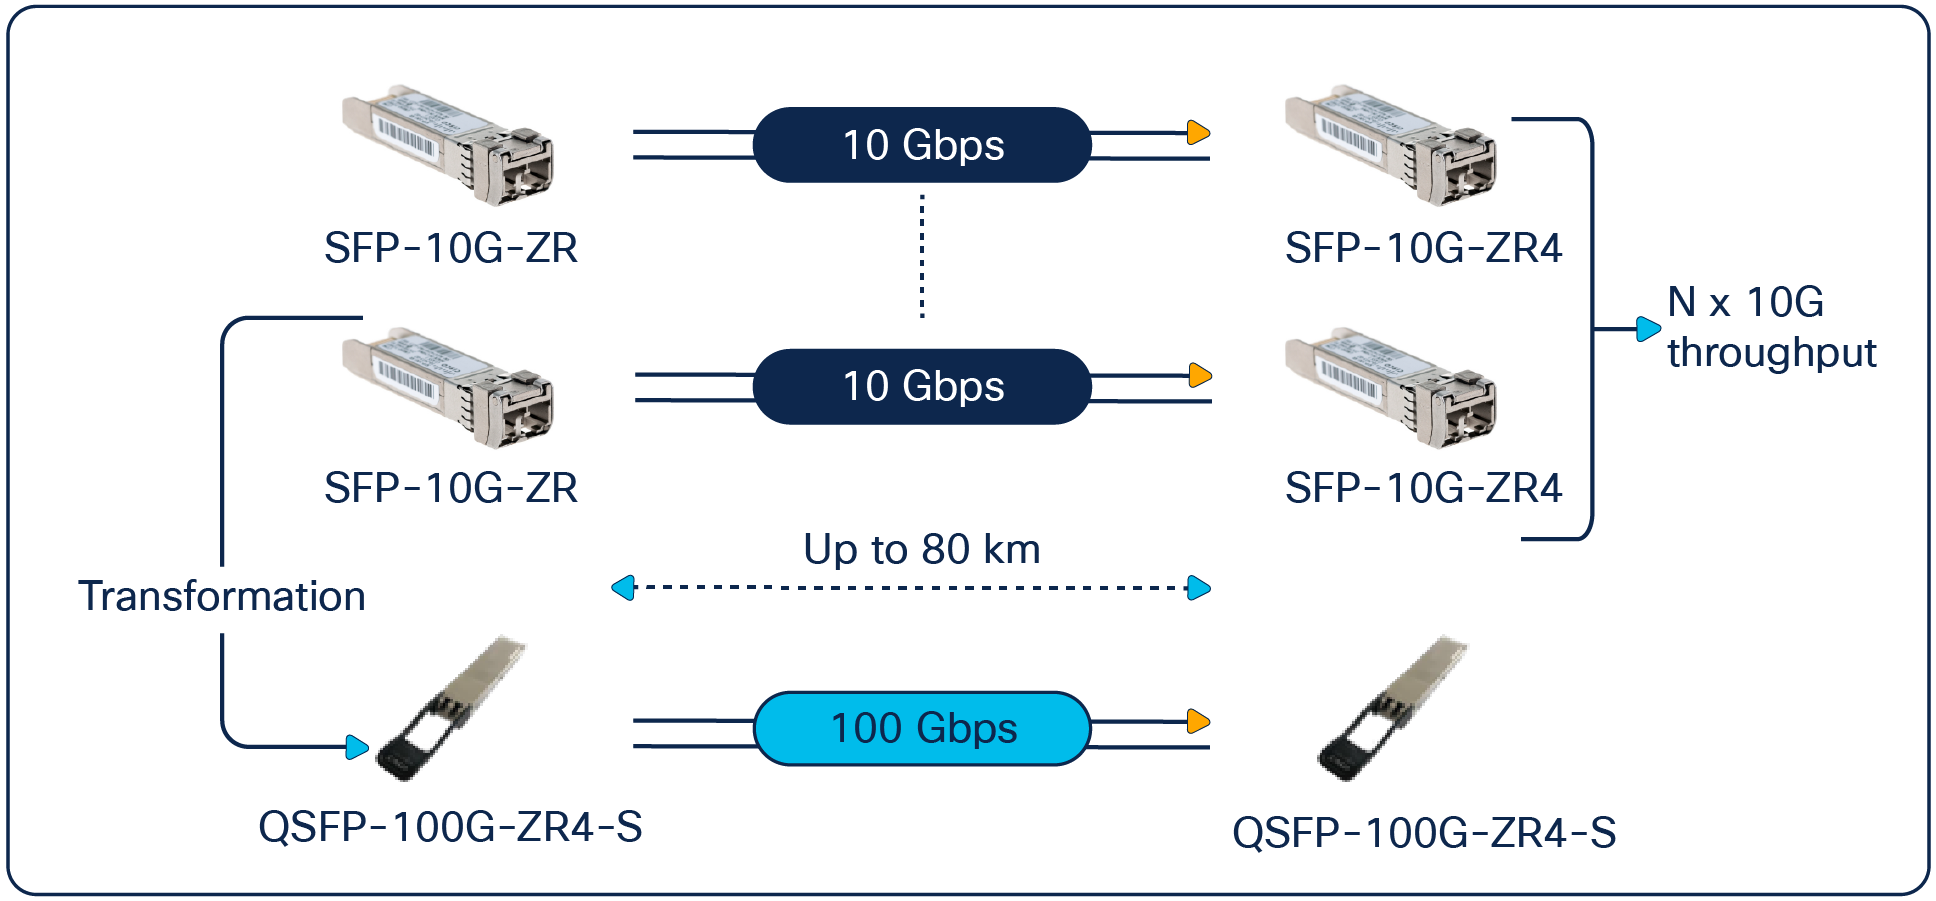 QSFP-100G-ZR4-S equips network operators to transform the services they offer to customers